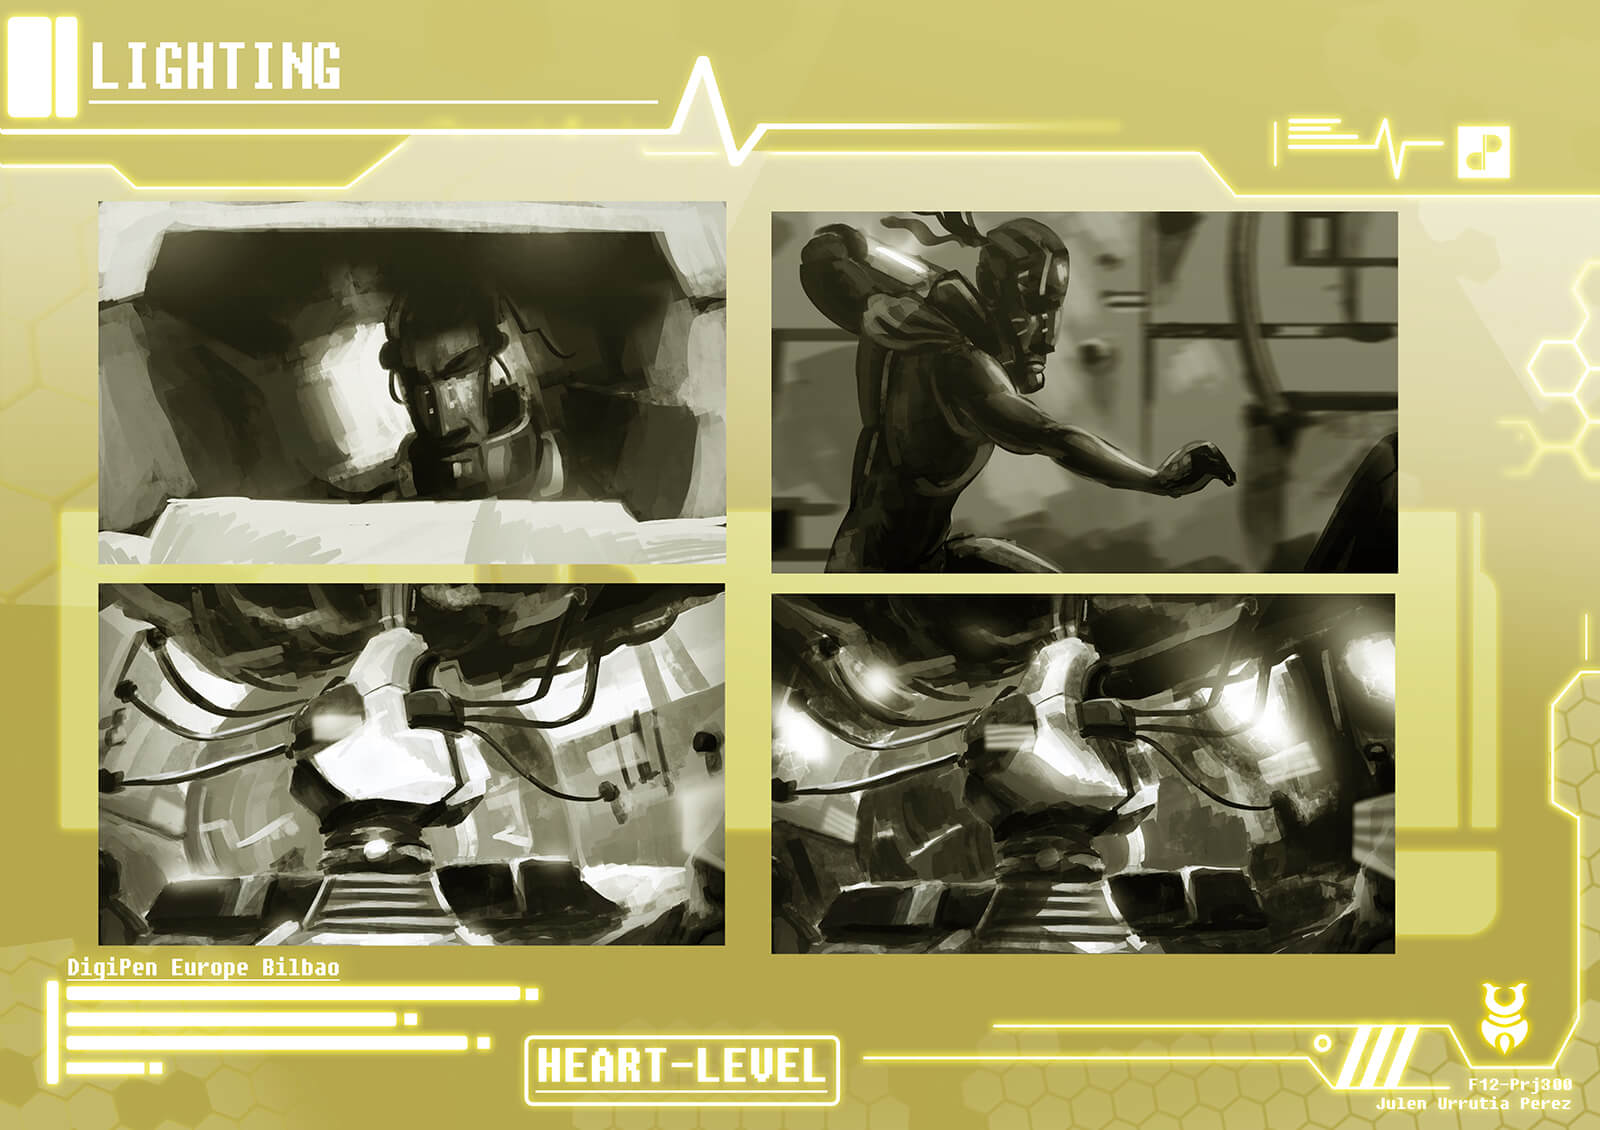 Black-and-white drawings detailing lighting schemes of various scenes in the film Heart Level